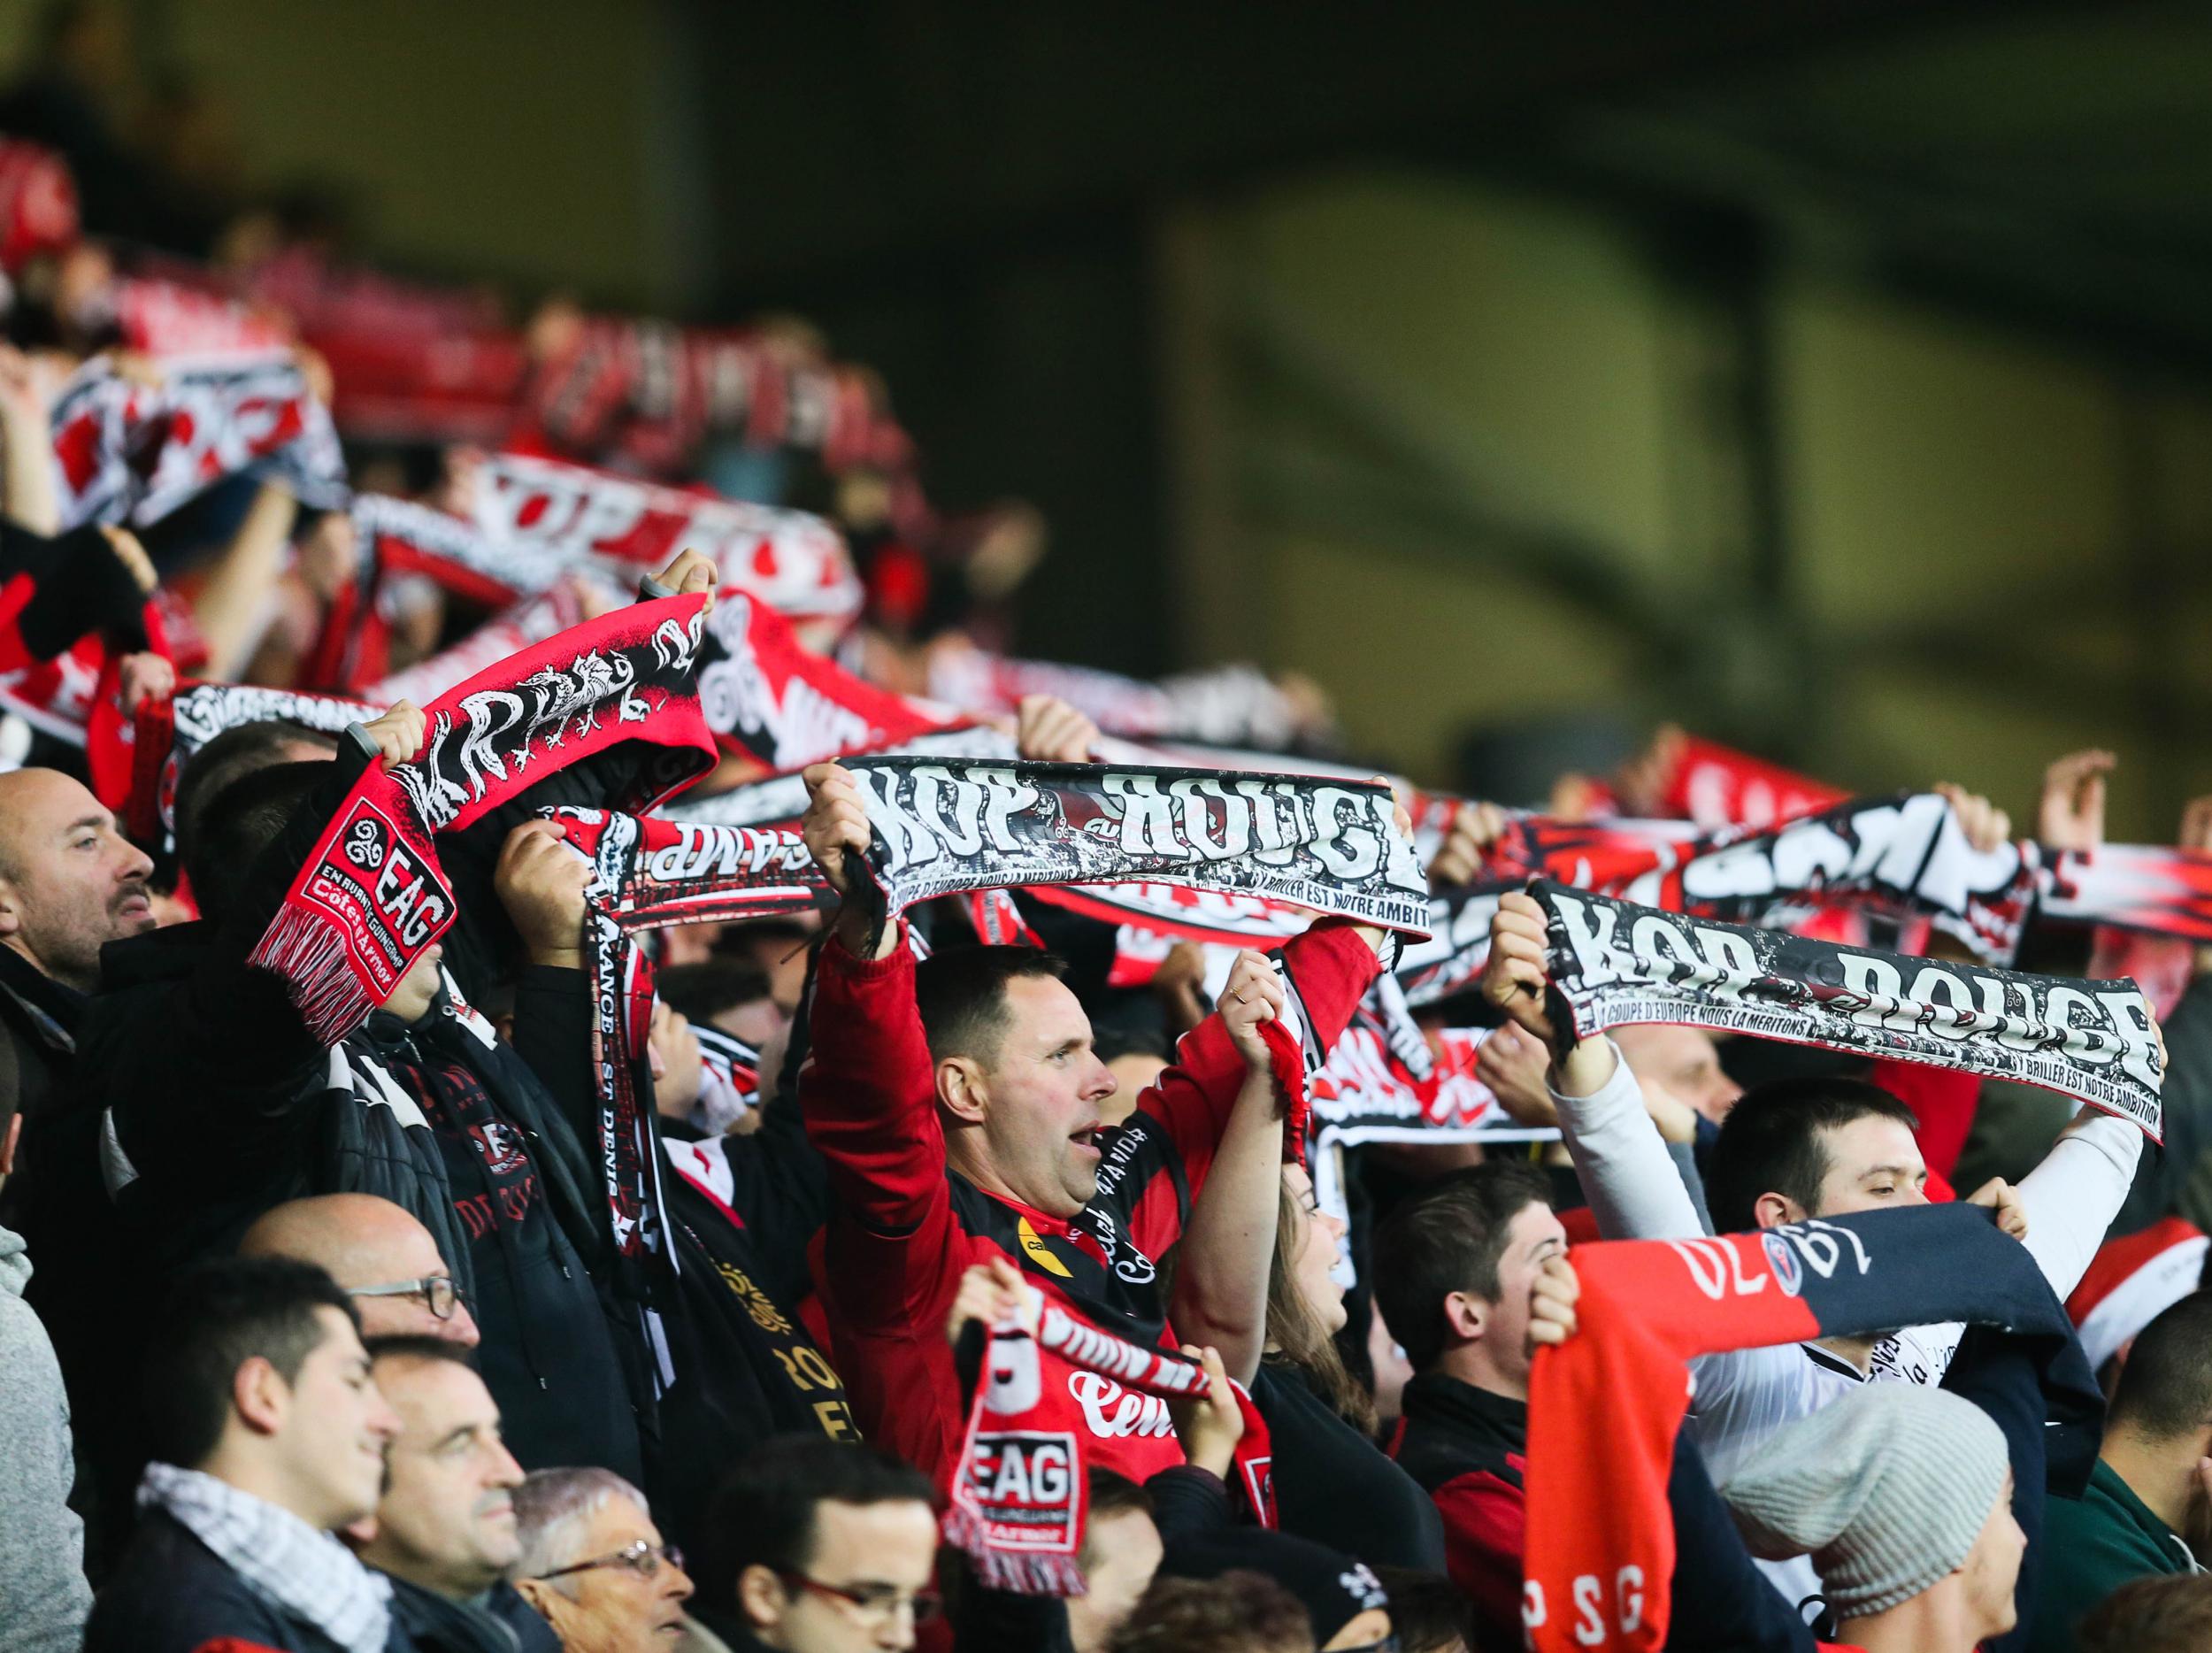 In a league of staggering financial inequality, modest Guingamp continue to punch above their weight